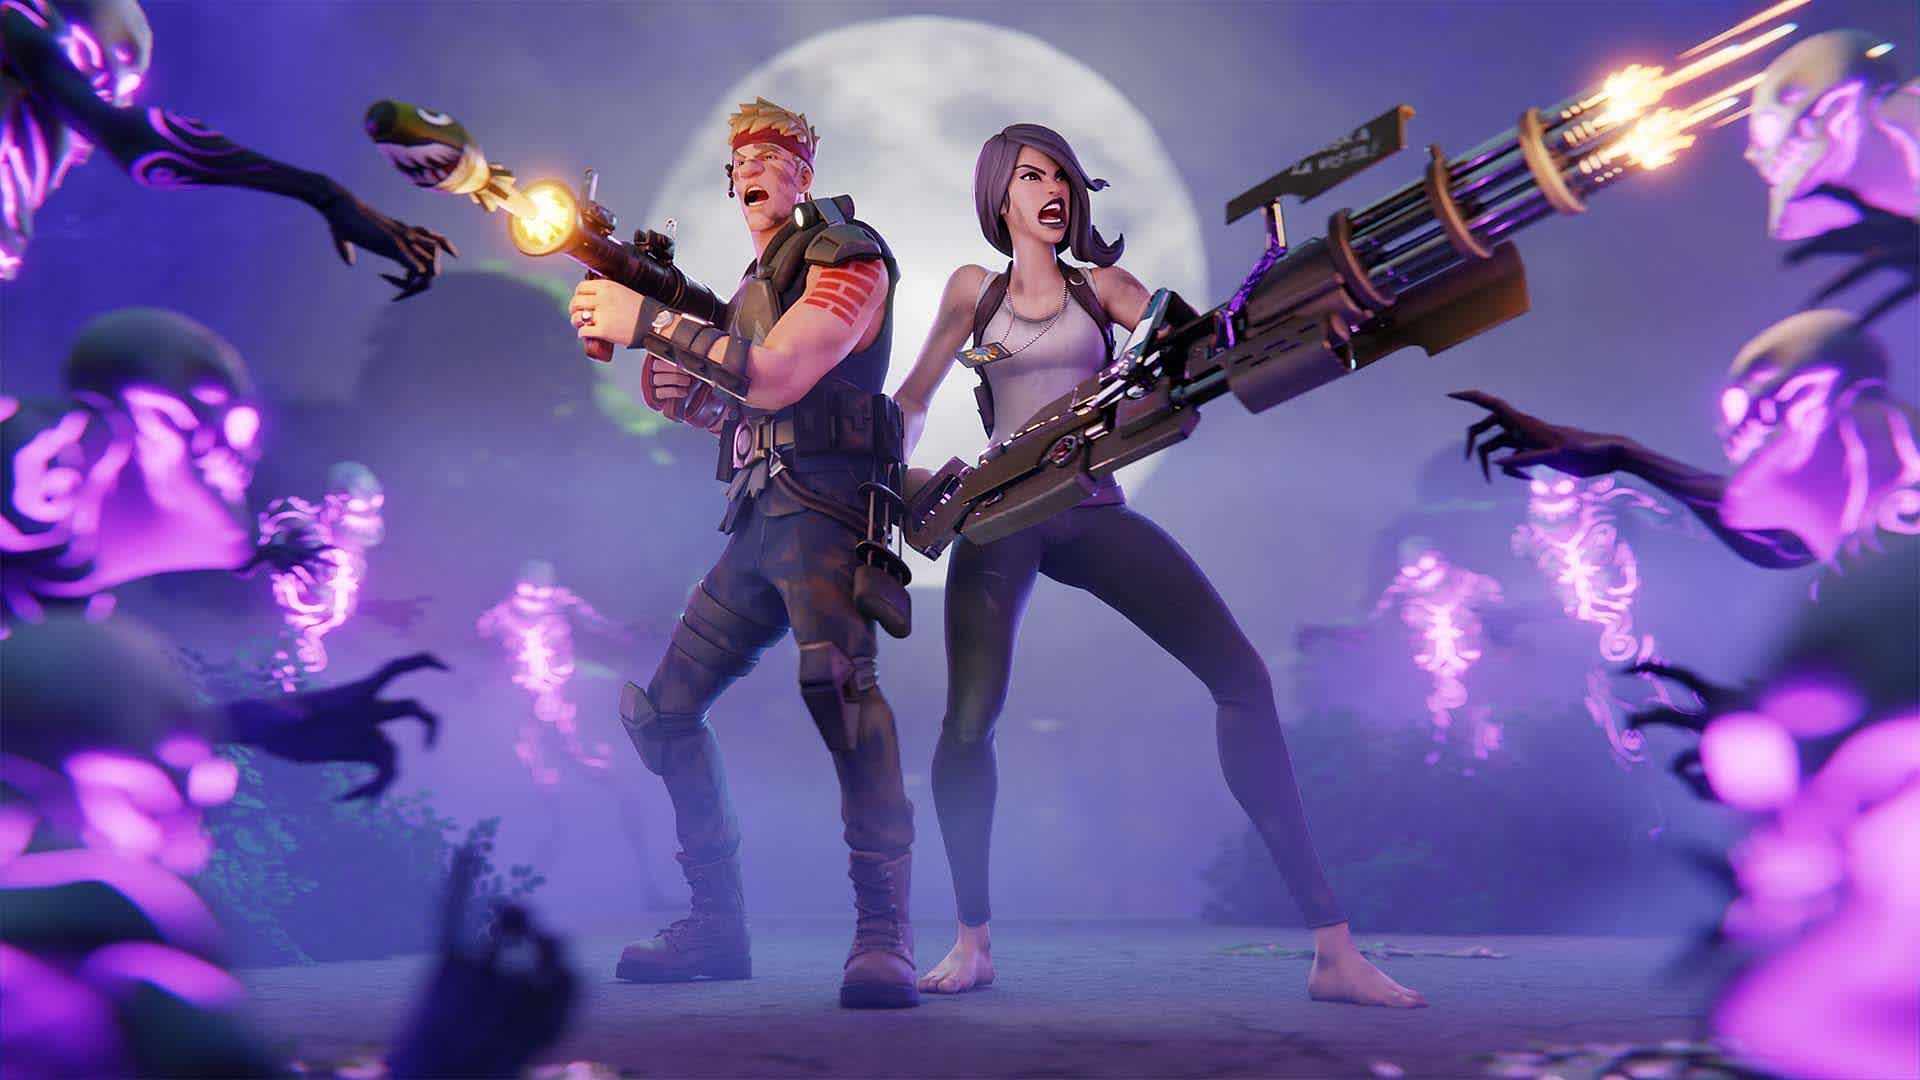 Fortnite was the Most Downloaded Free Game on PlayStation in